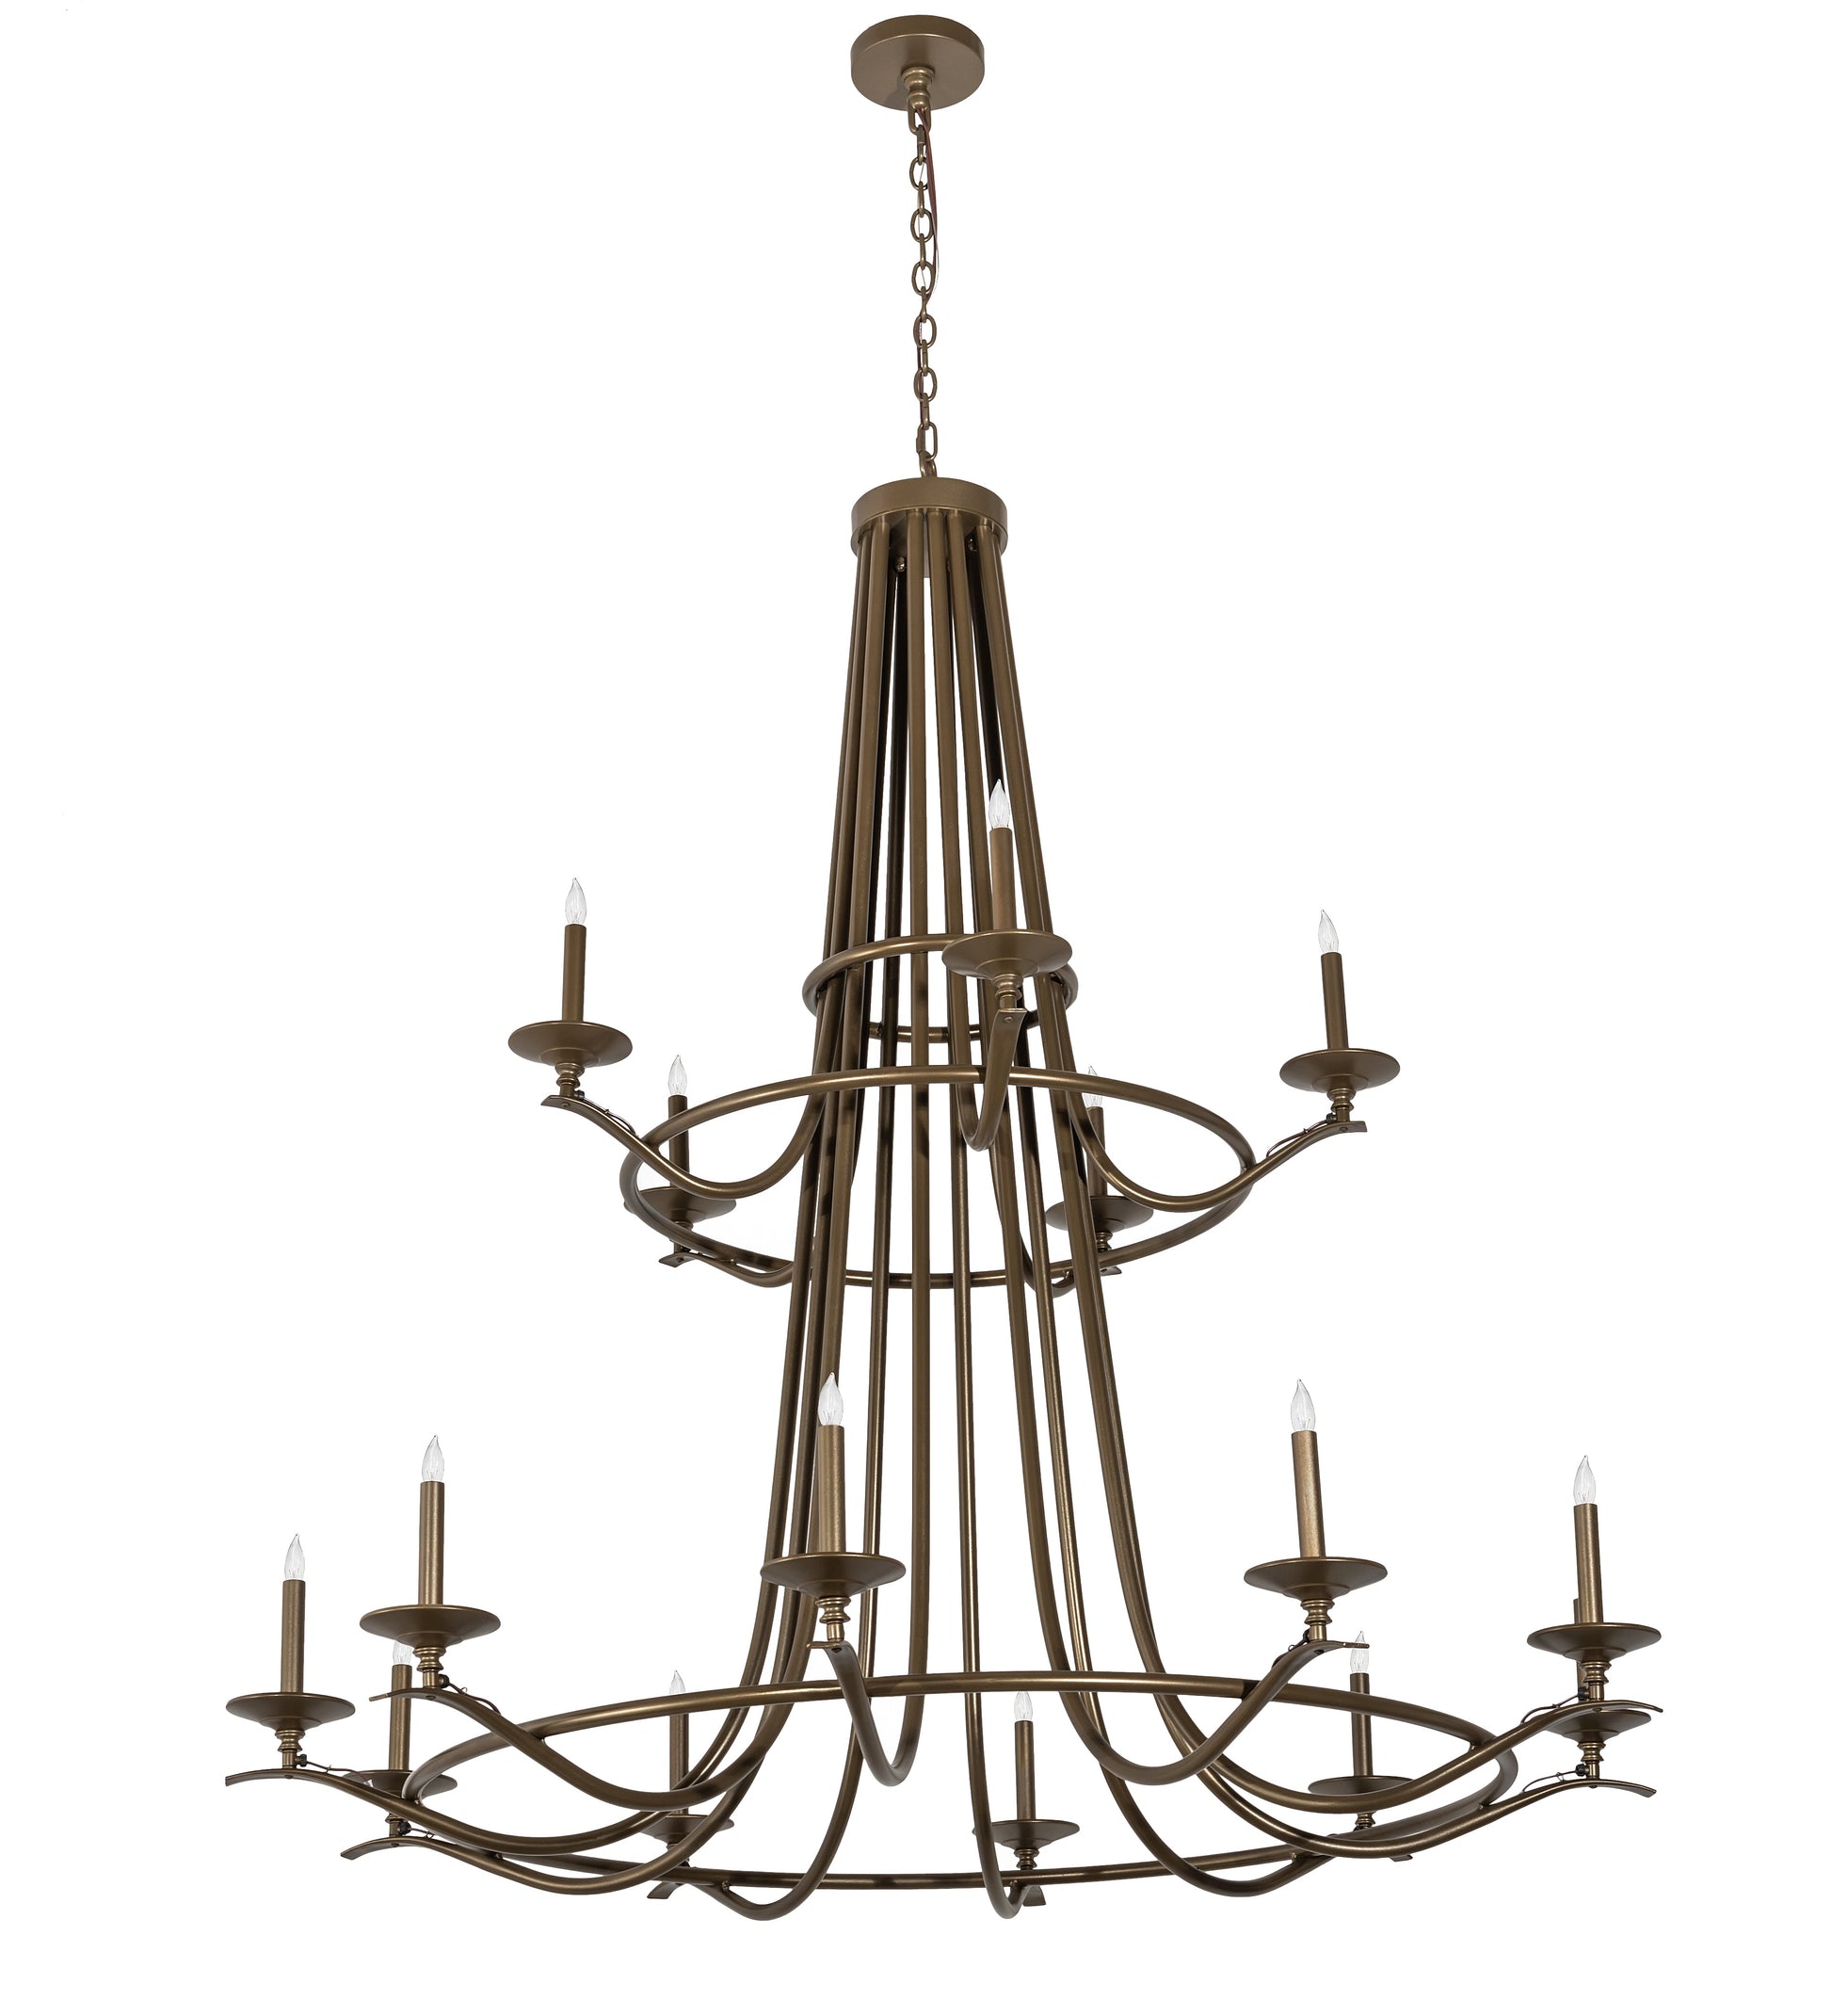 60" Octavia 15-Light Two Tier Chandelier by 2nd Ave Lighting